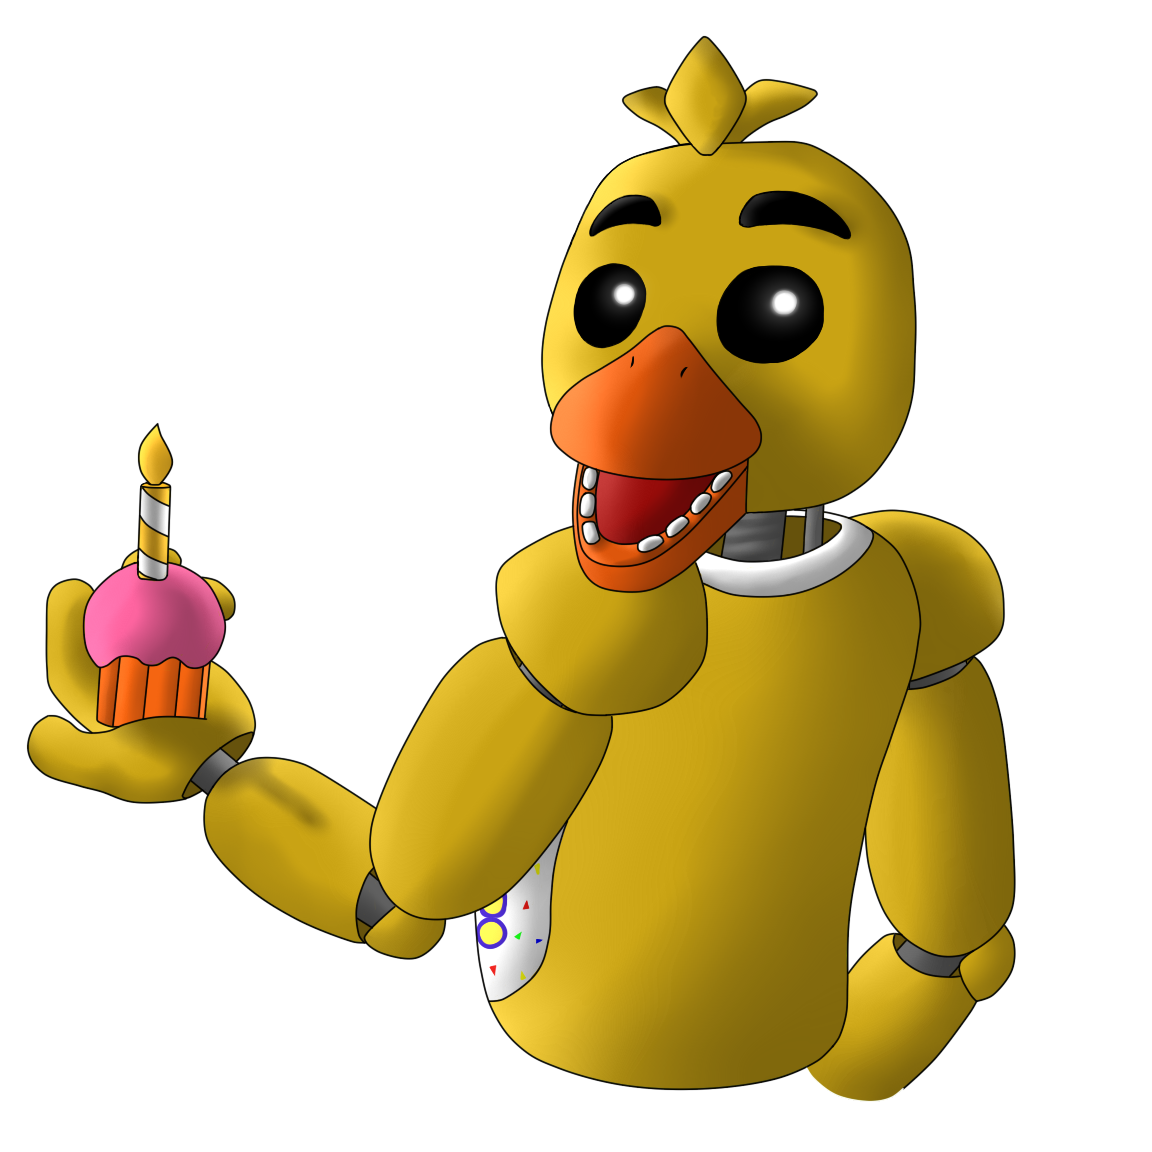 It's me Chica the Chicken - FNaF Fanart Shading. 